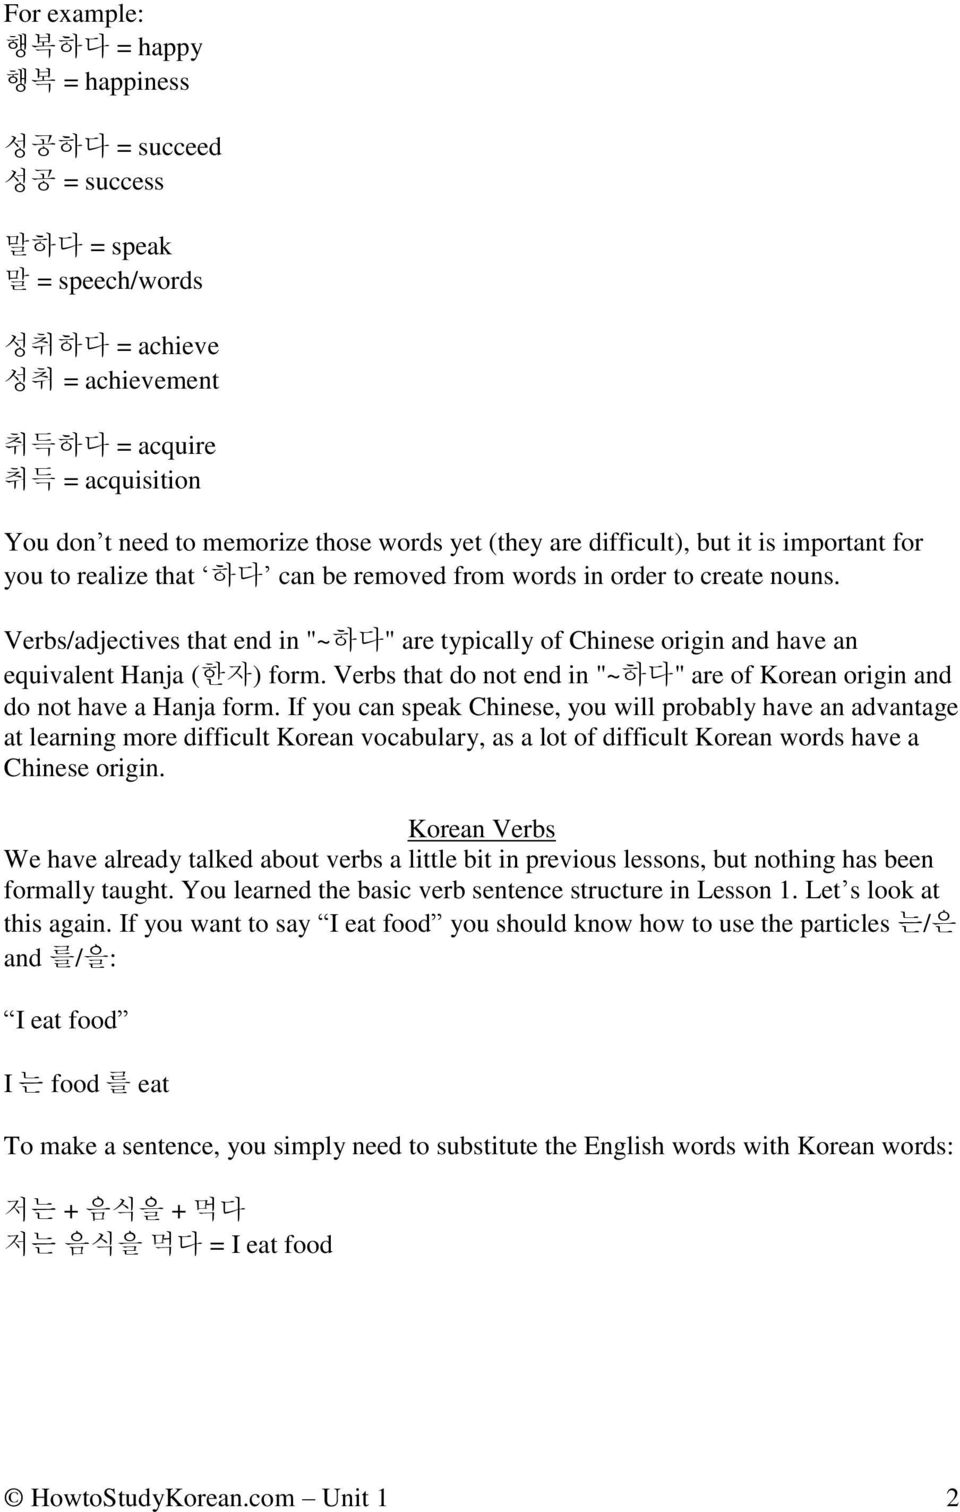 Verbs/adjectives that end in "~하다" are typically of Chinese origin and have an equivalent Hanja (한자) form. Verbs that do not end in "~하다" are of Korean origin and do not have a Hanja form.